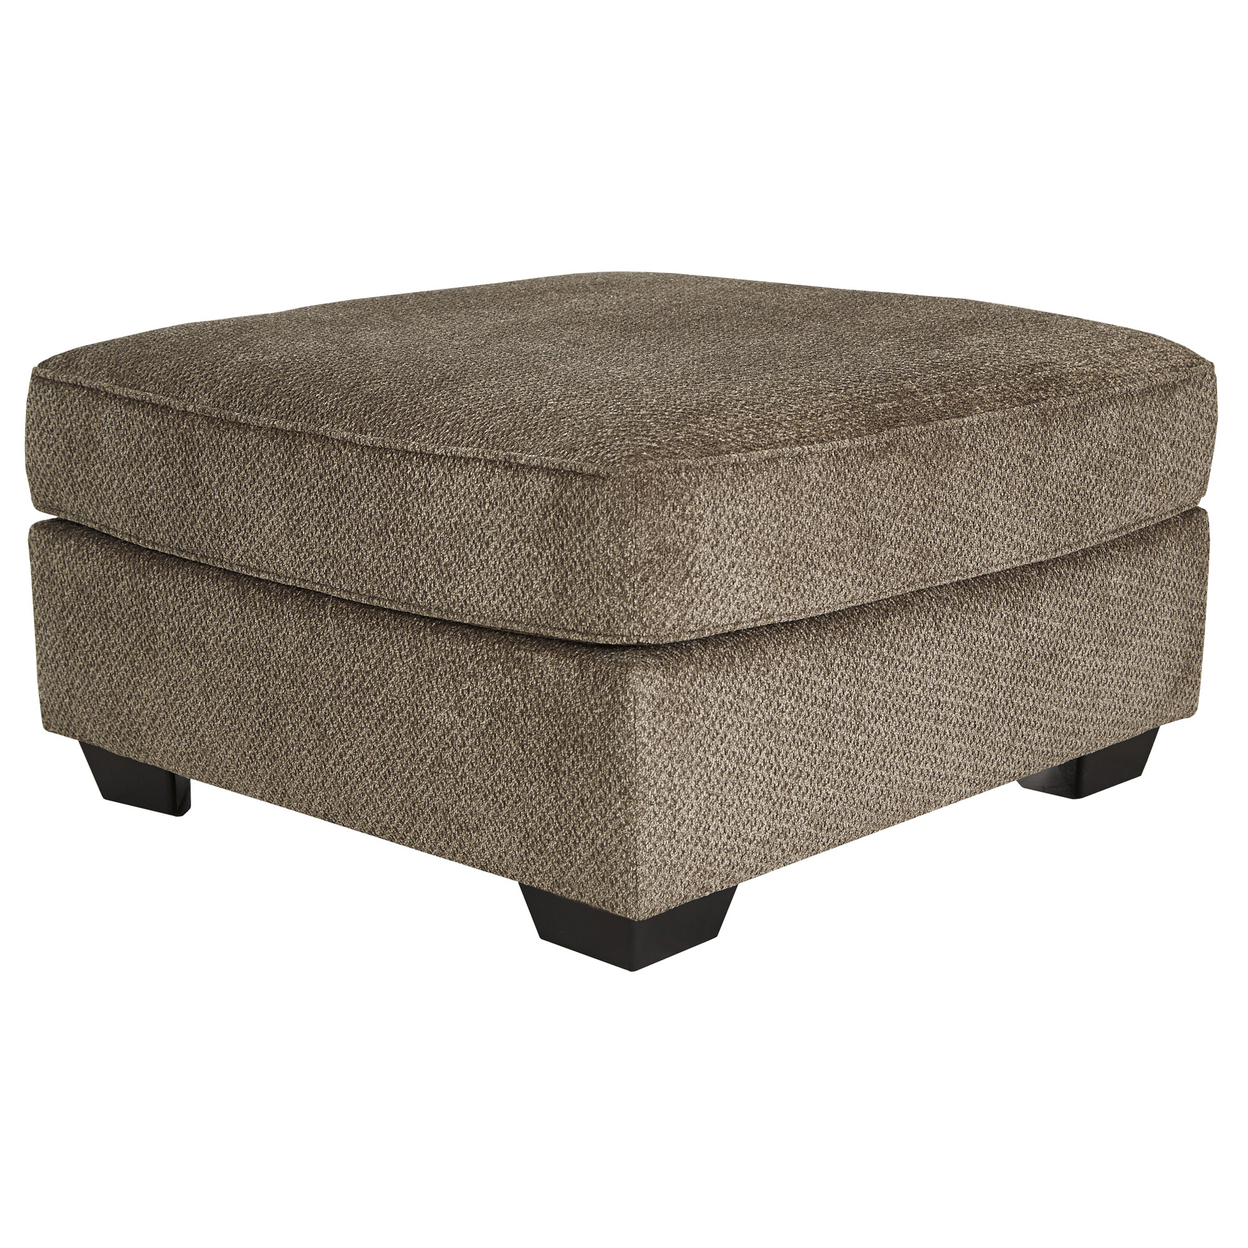 Fabric Upholstered Square Oversized Ottoman With Tapered Block Legs, Brown- Saltoro Sherpi